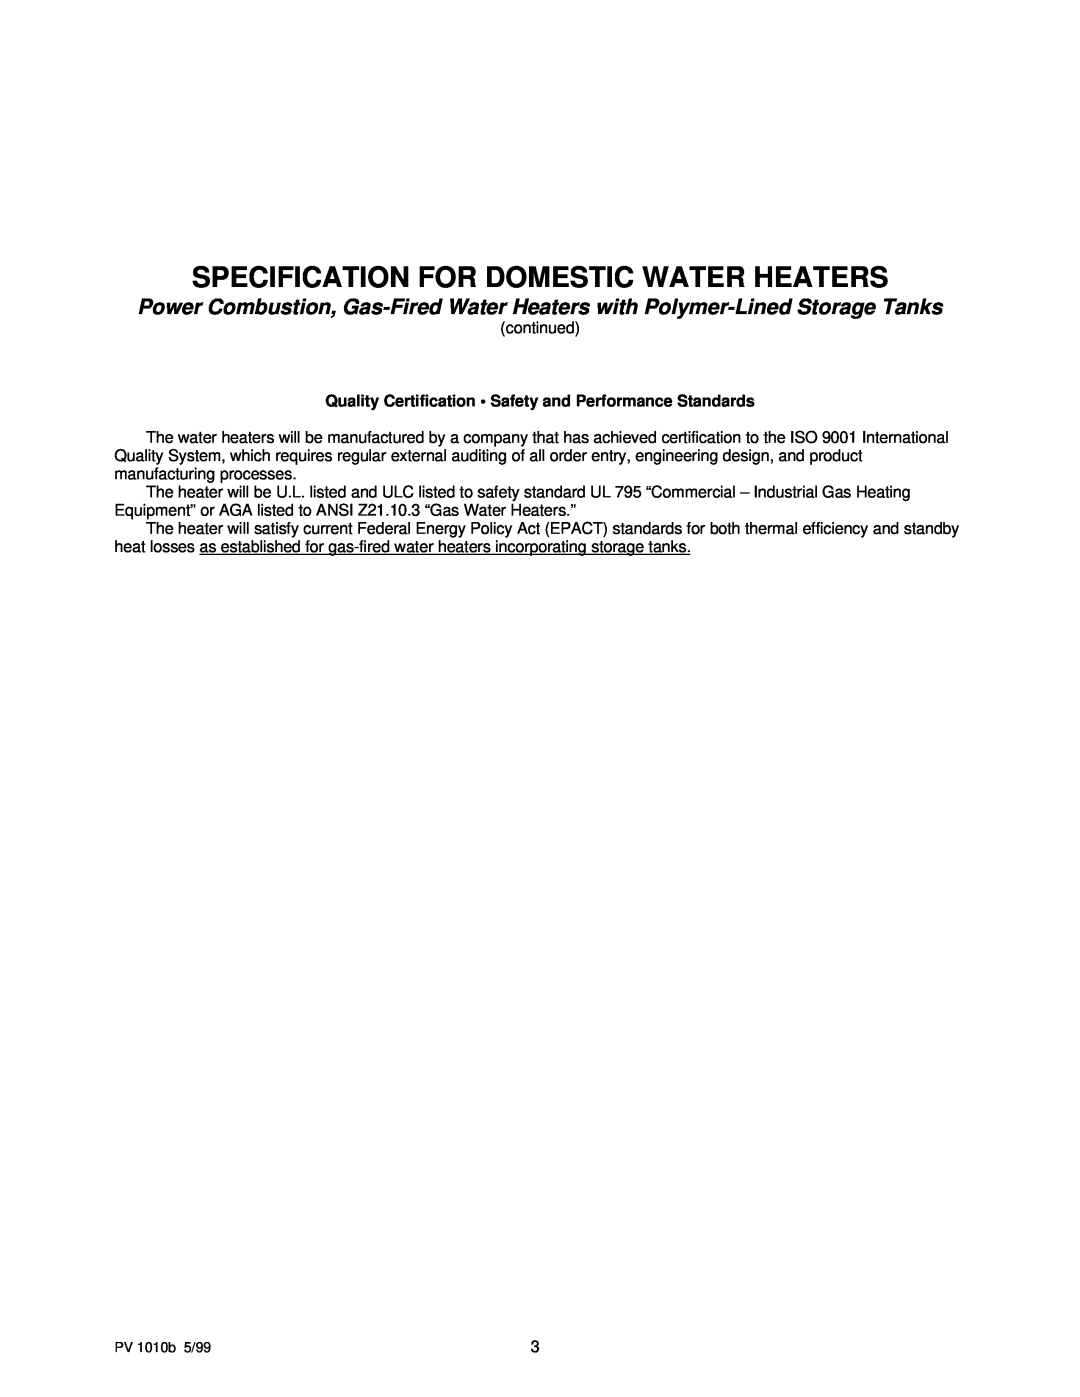 PVI Industries PV 1010b manual Specification For Domestic Water Heaters, continued 